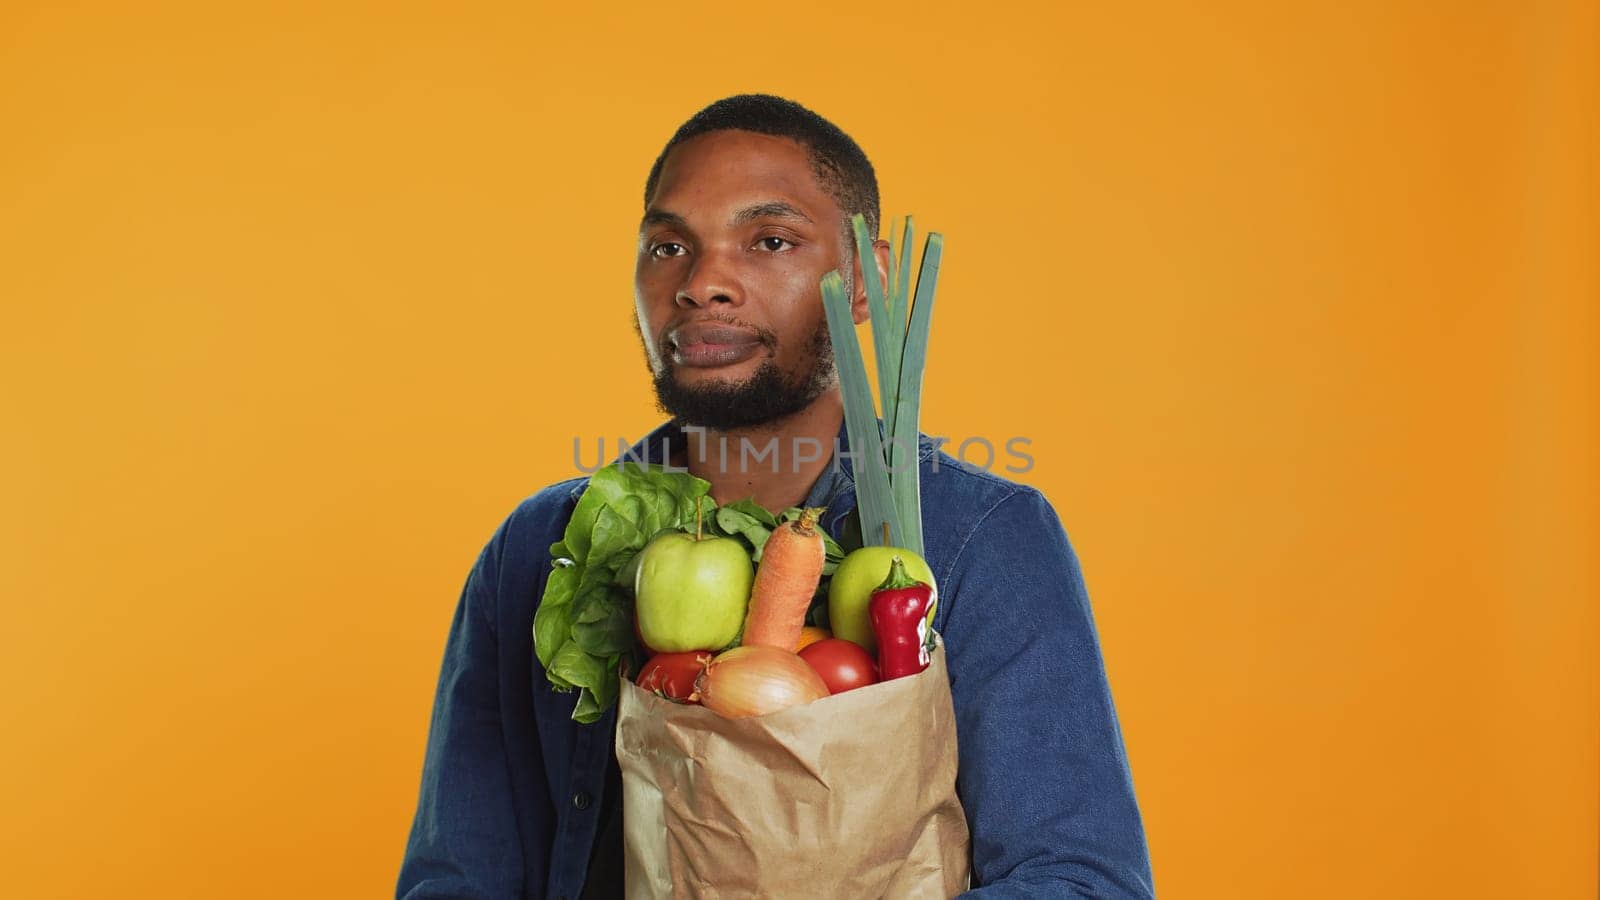 Young adult accidentally dropping an apple from his paper bag full of ethically sourced fruits and veggies, buying a variety of organic homegrown goods. Support vegan lifestyle. Camera A.